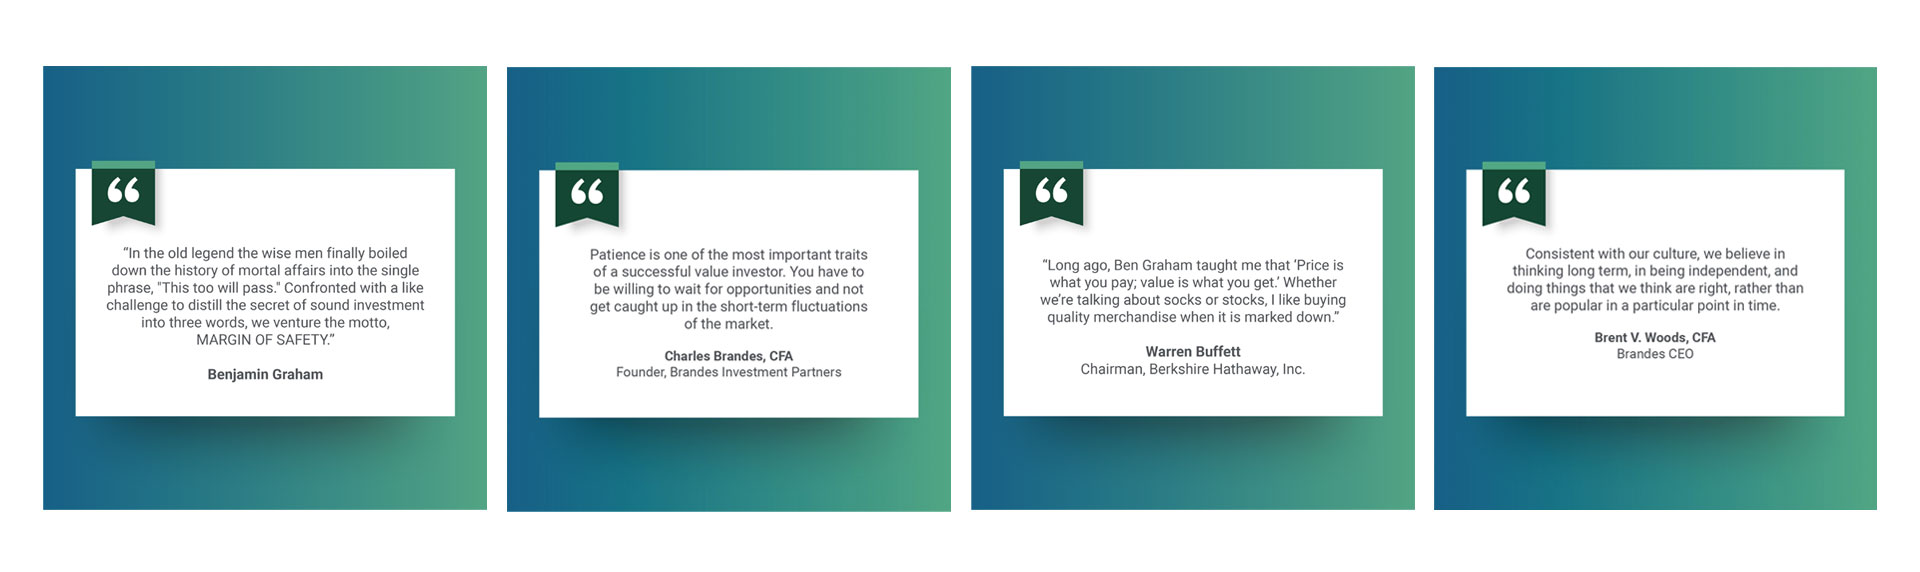 Brandes Investment Partners LinkedIn Quote Cards